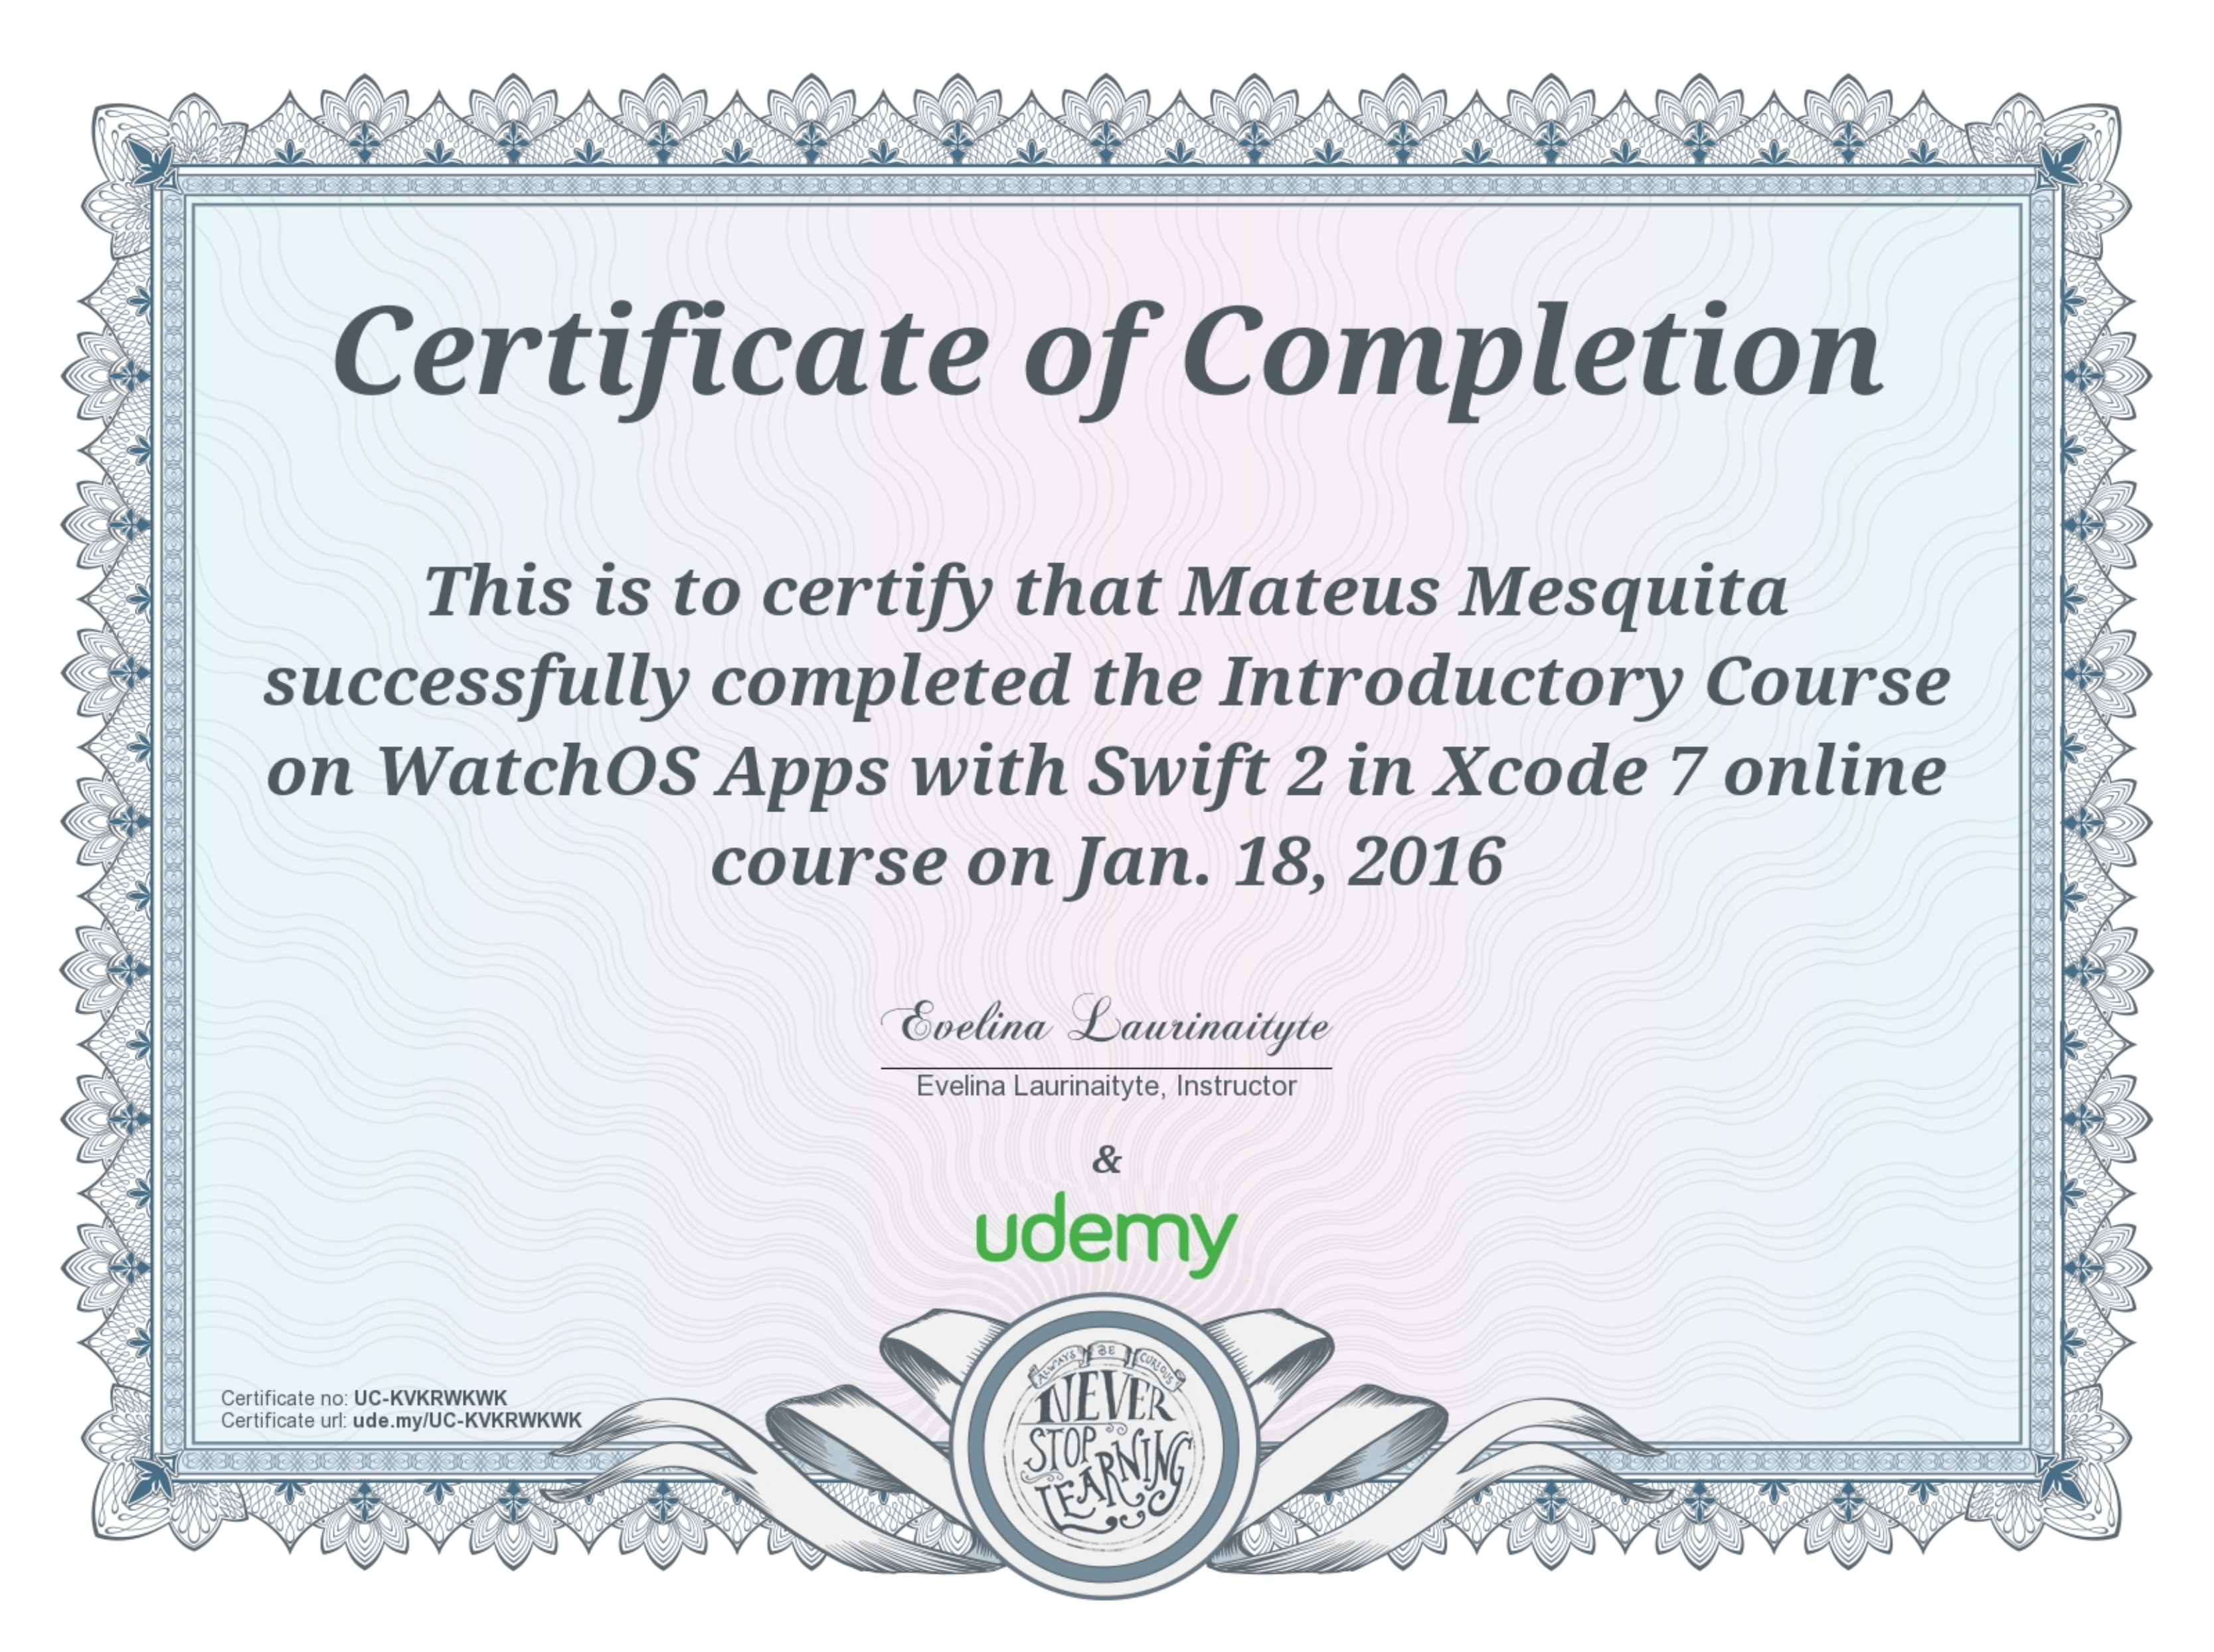 Image of 2016_01_18_Introductory_Course_on_WatchOS_Apps_with_Swift2_in_Xcode7